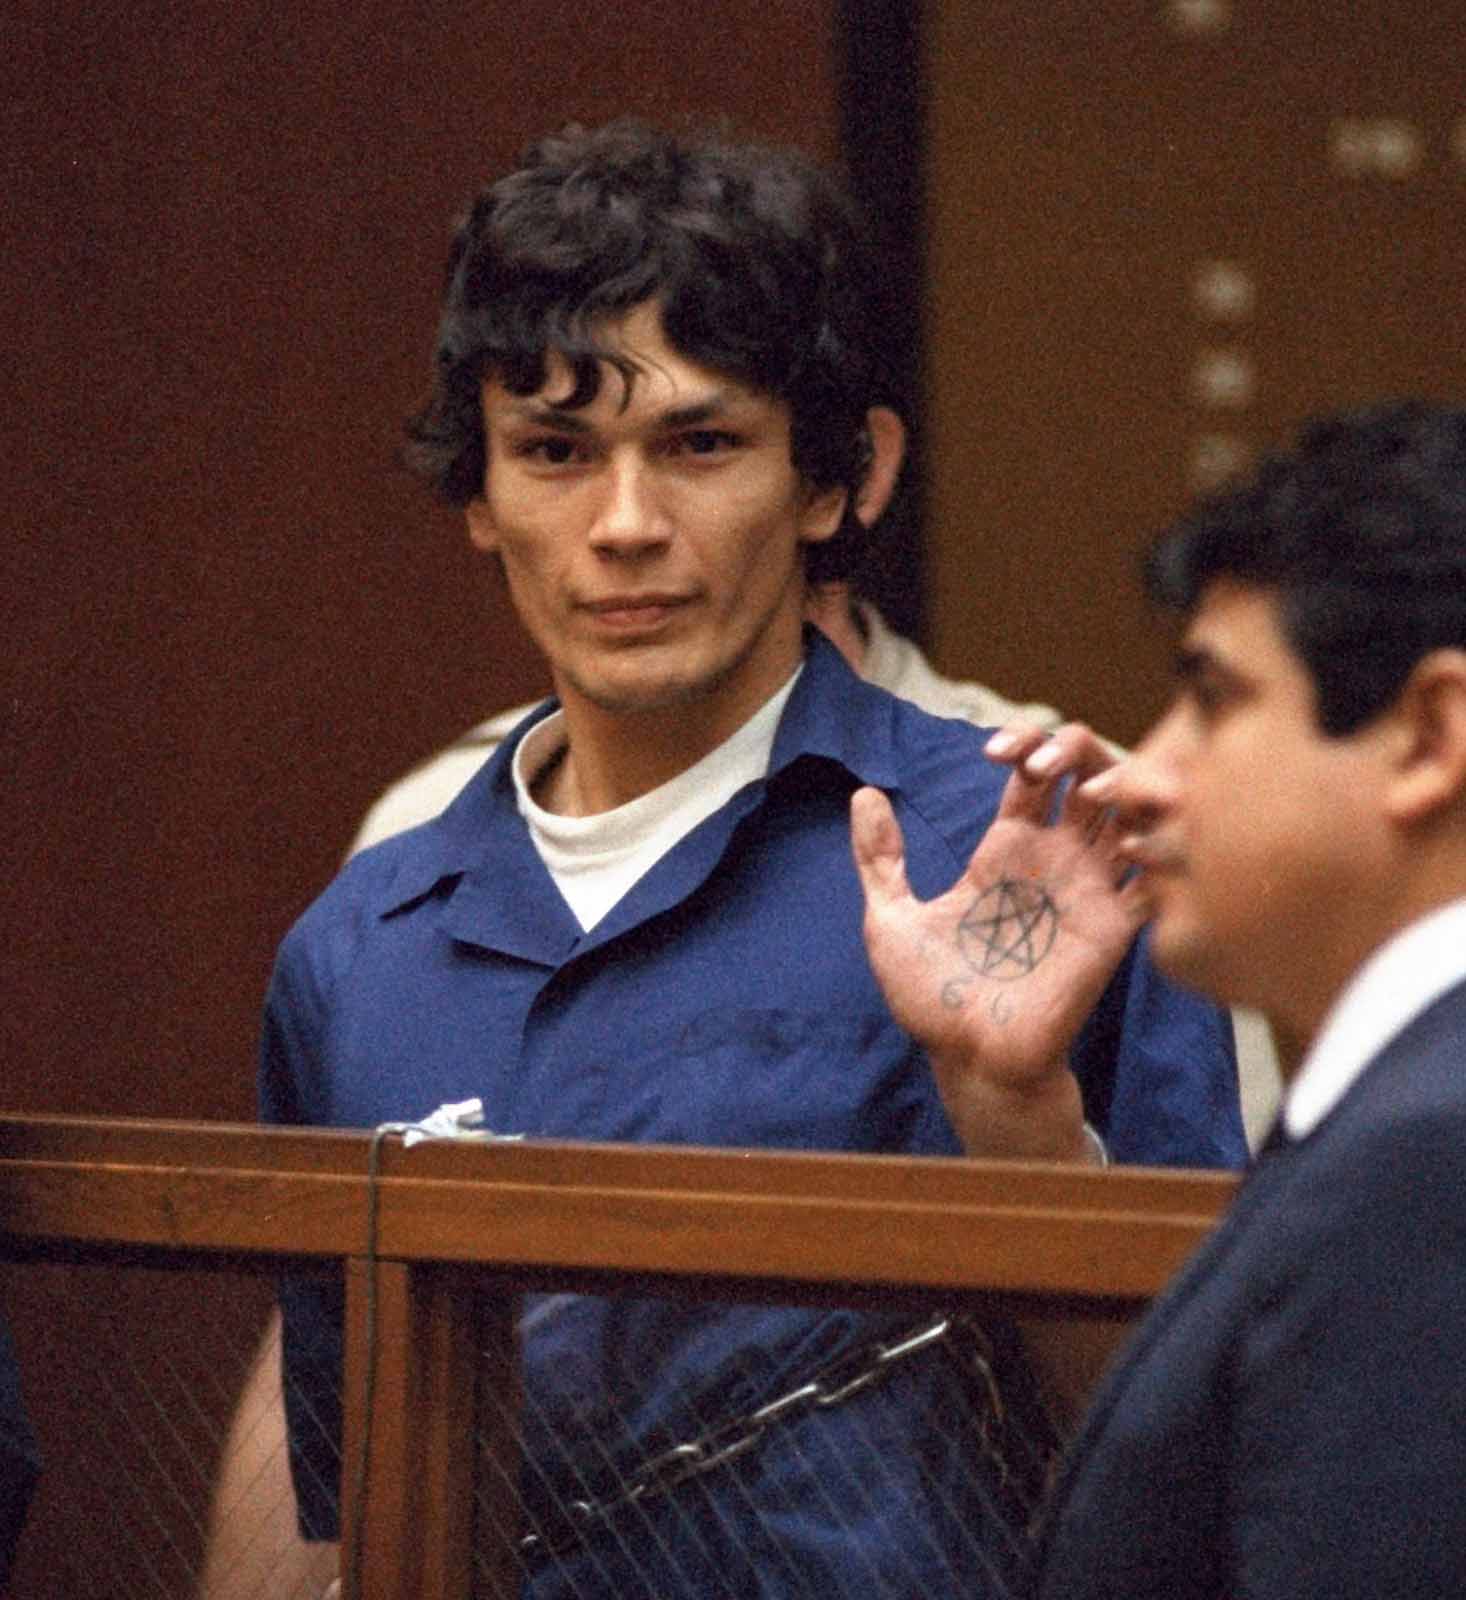 The Night Stalker terrorized LA and San Francisco for nearly two years. But the community were the ones to finally take him down when he messed up.